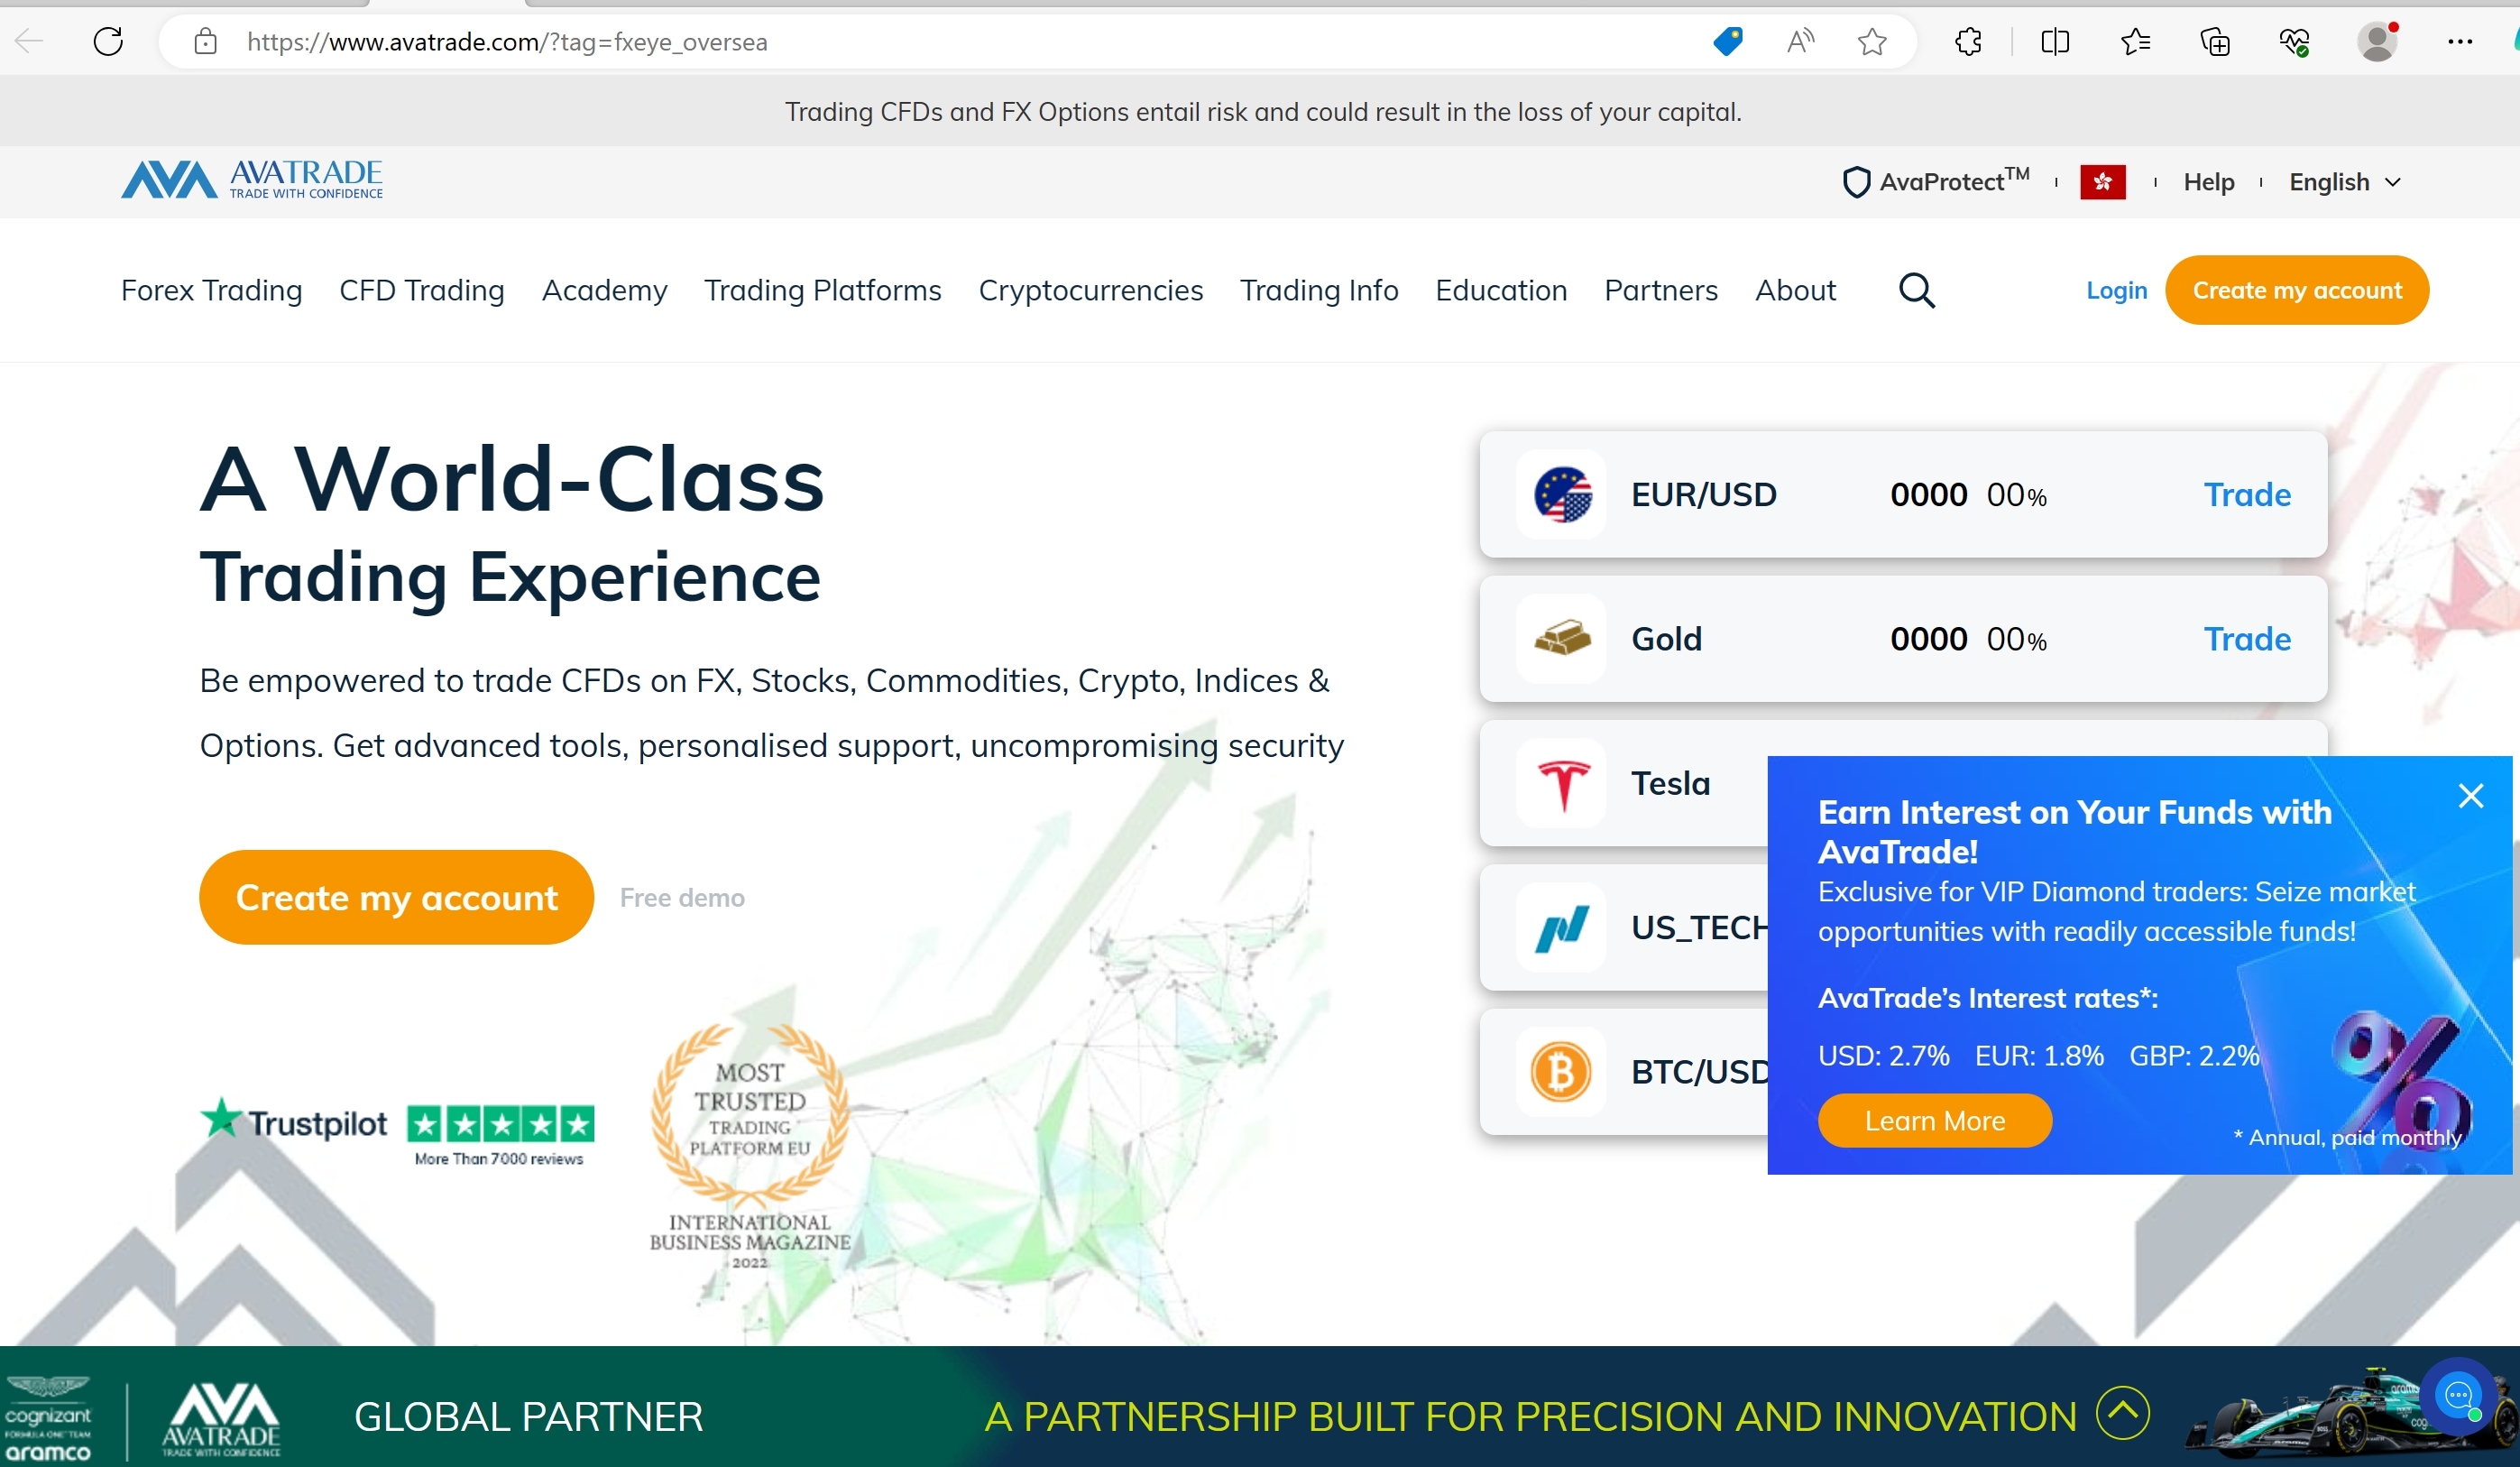 AvaTrade's home page